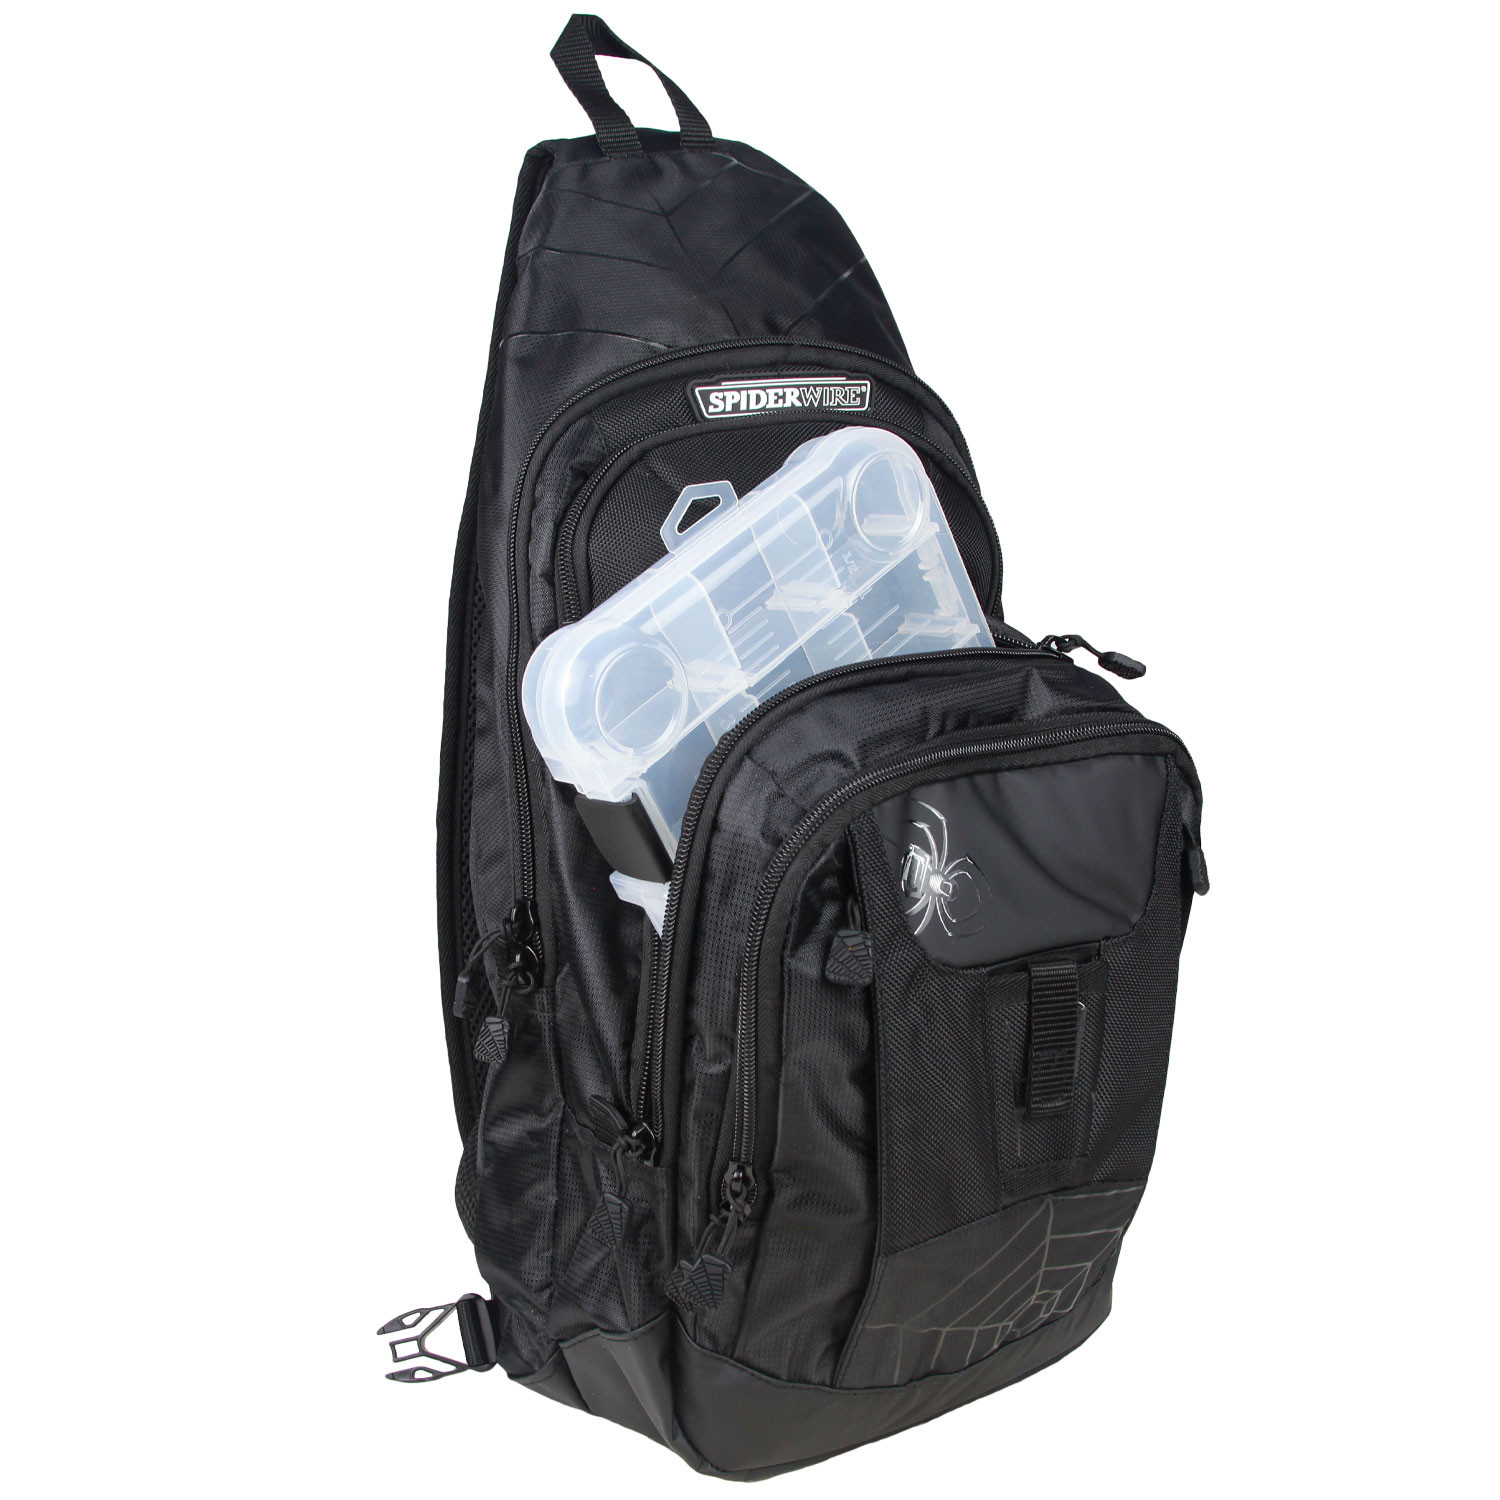 SpiderWire Sling Tackle Bag w/ Medium Utility Tackle Box